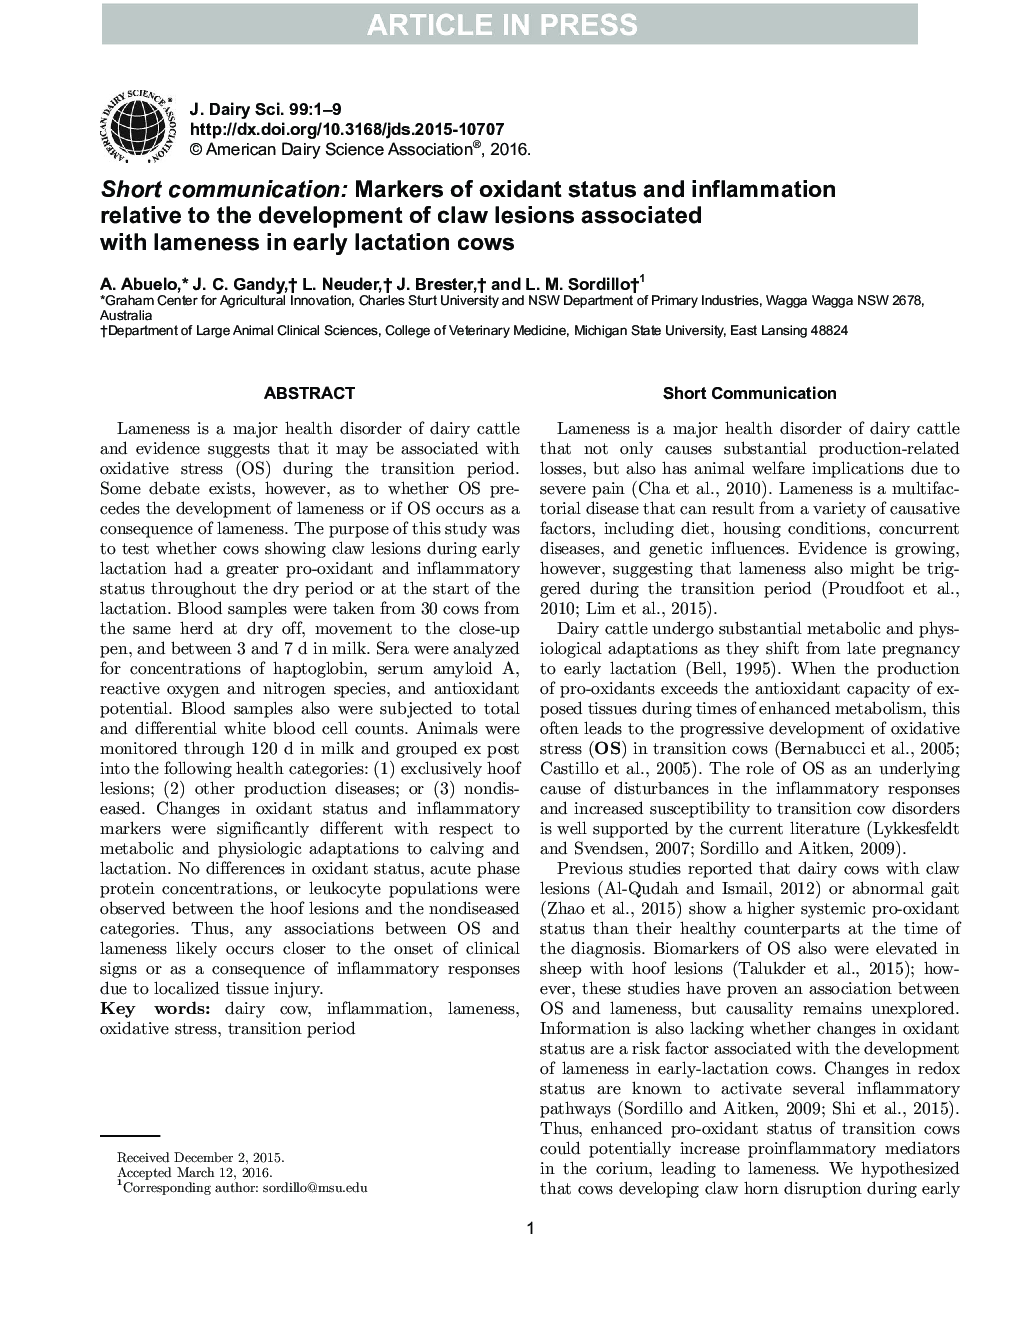 Short communication: Markers of oxidant status and inflammation relative to the development of claw lesions associated with lameness in early lactation cows